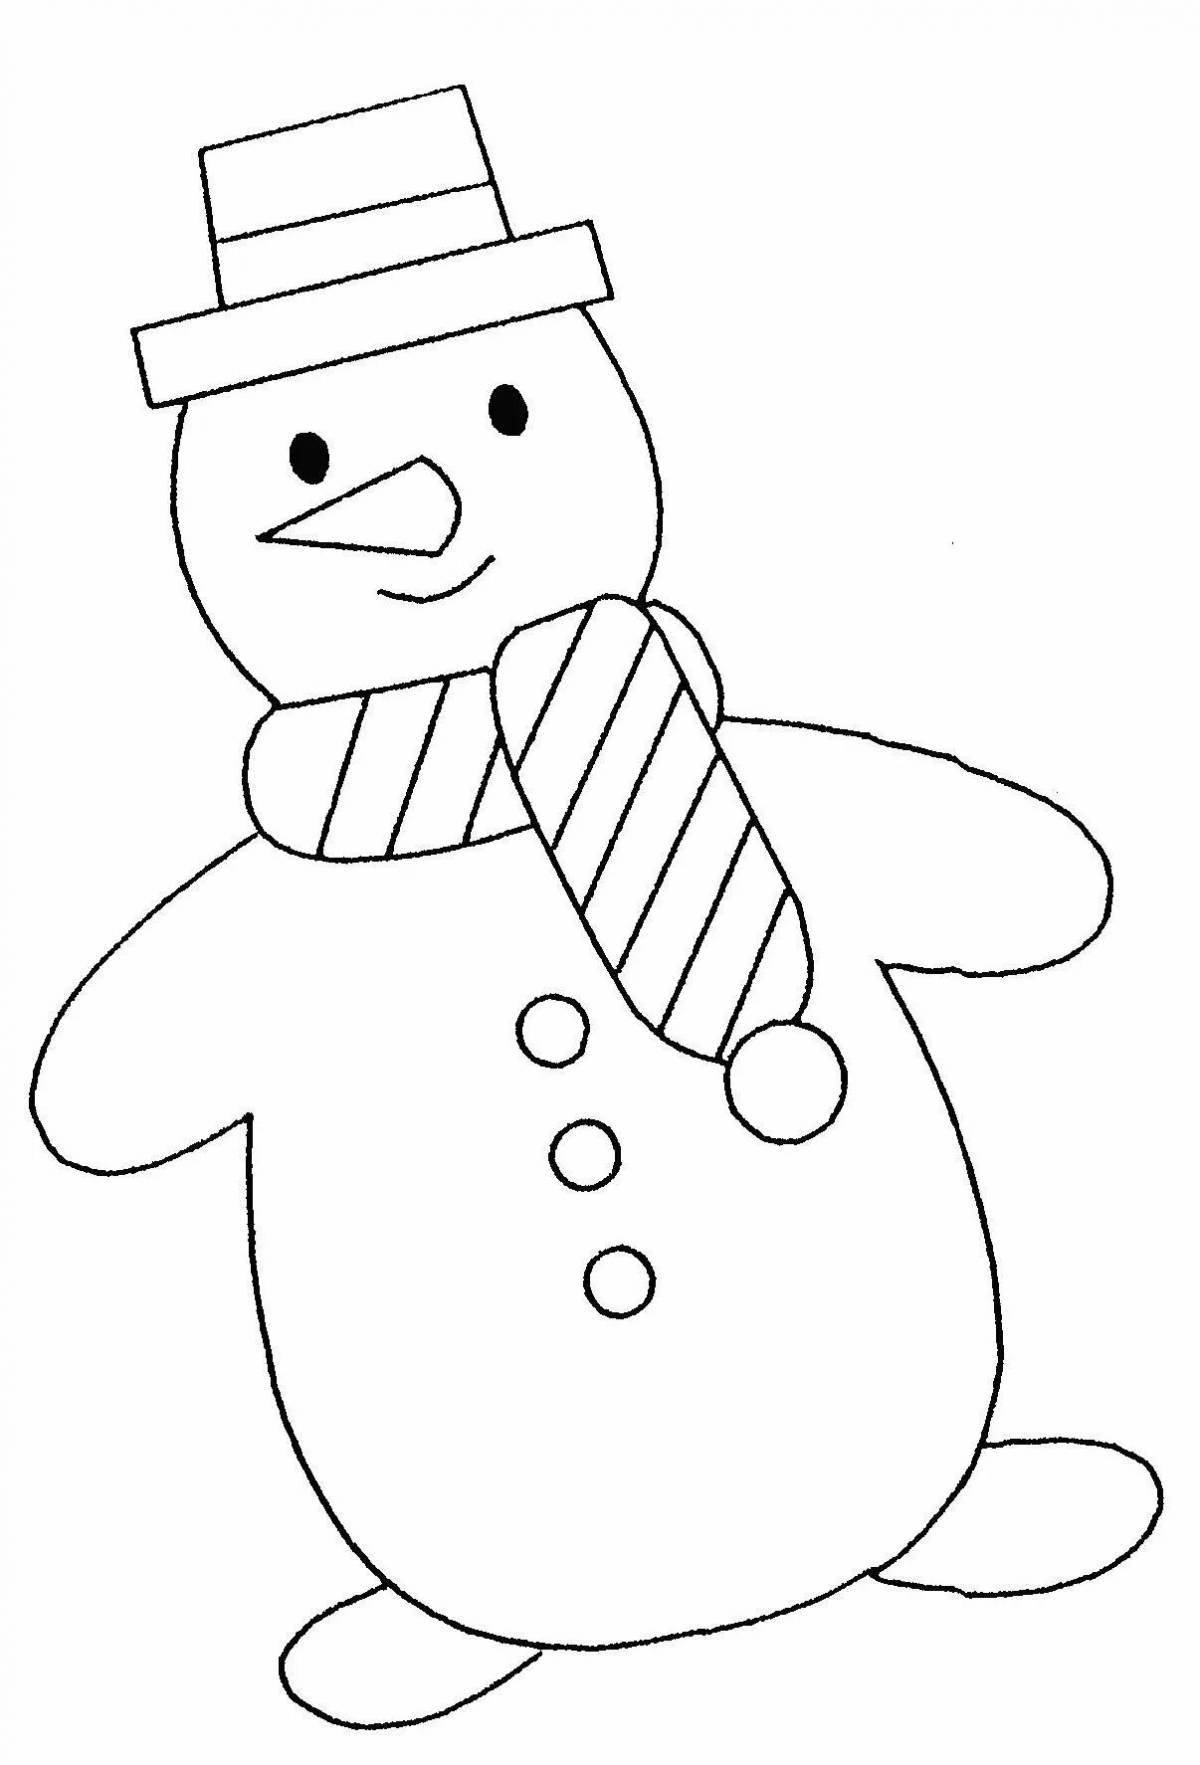 Comic coloring funny snowman for kids